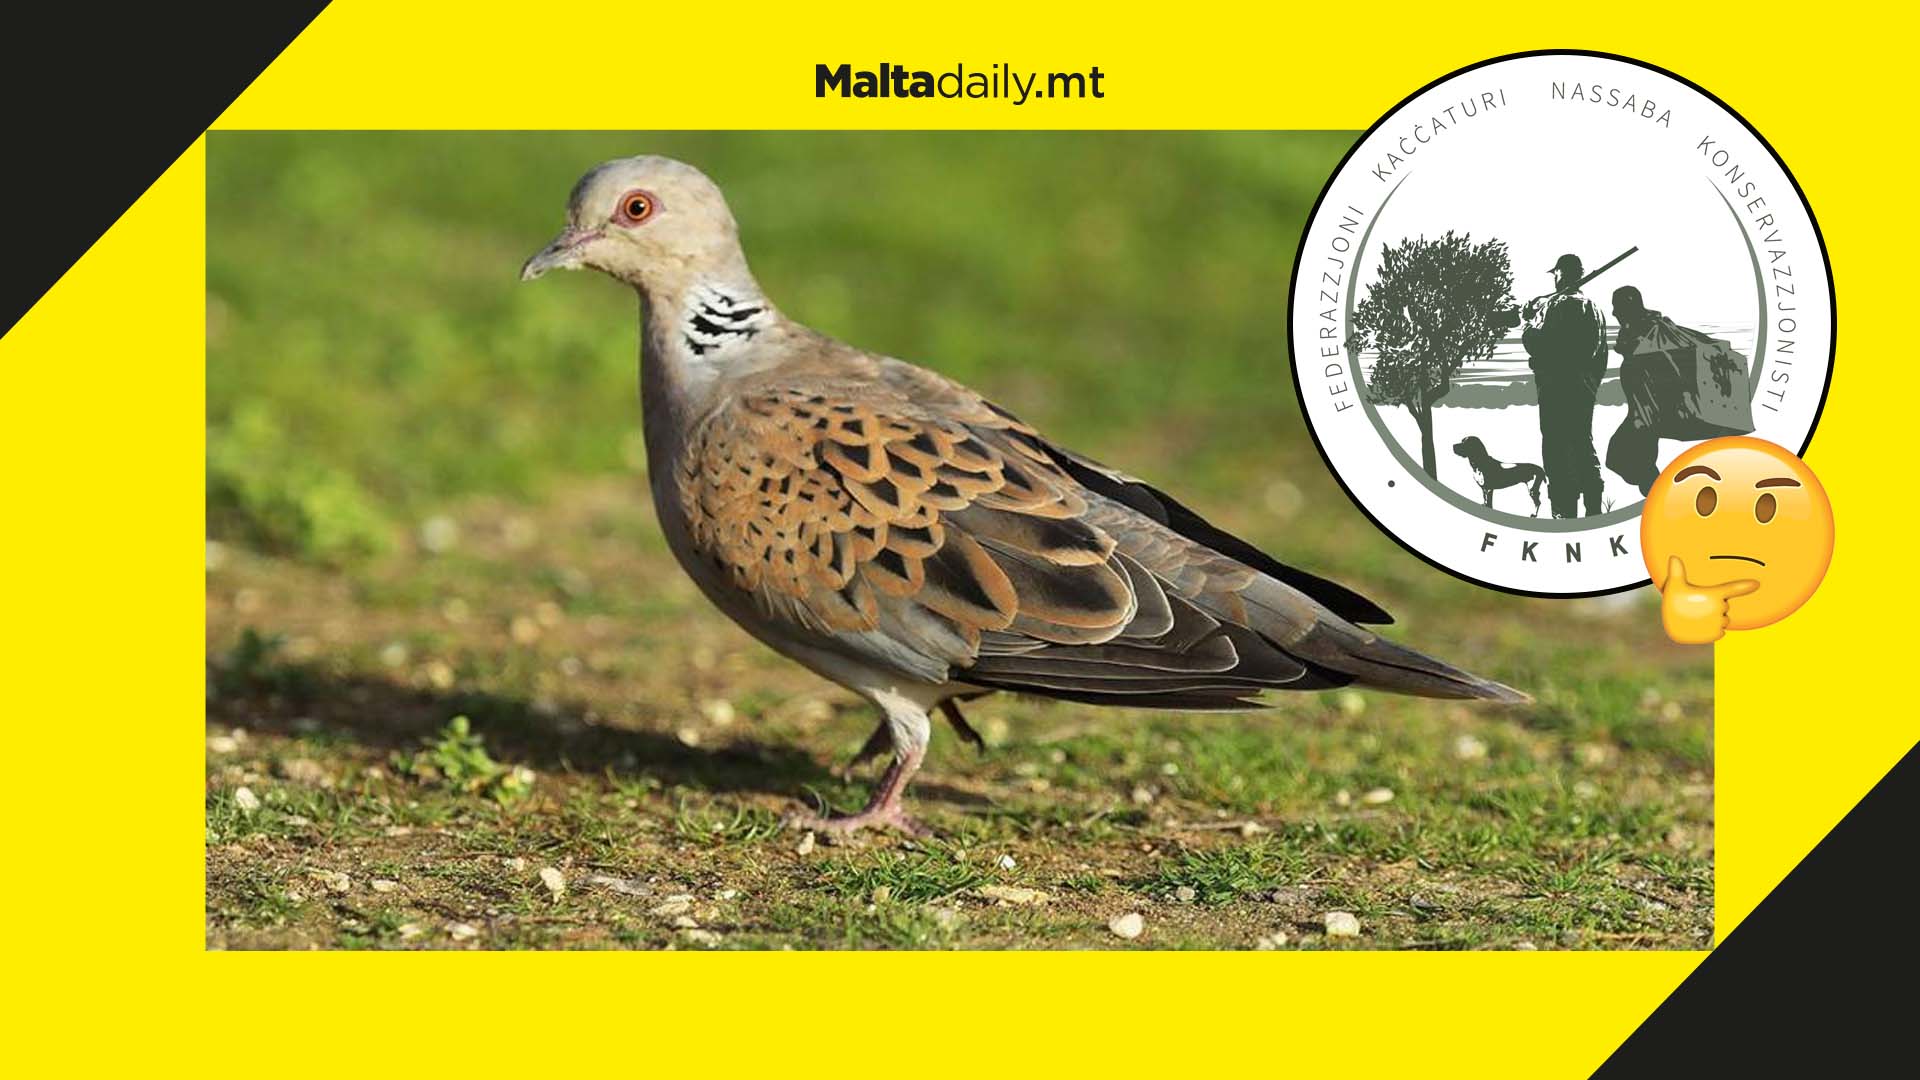 Research shows turtle dove hunting is sustainable say FKNK